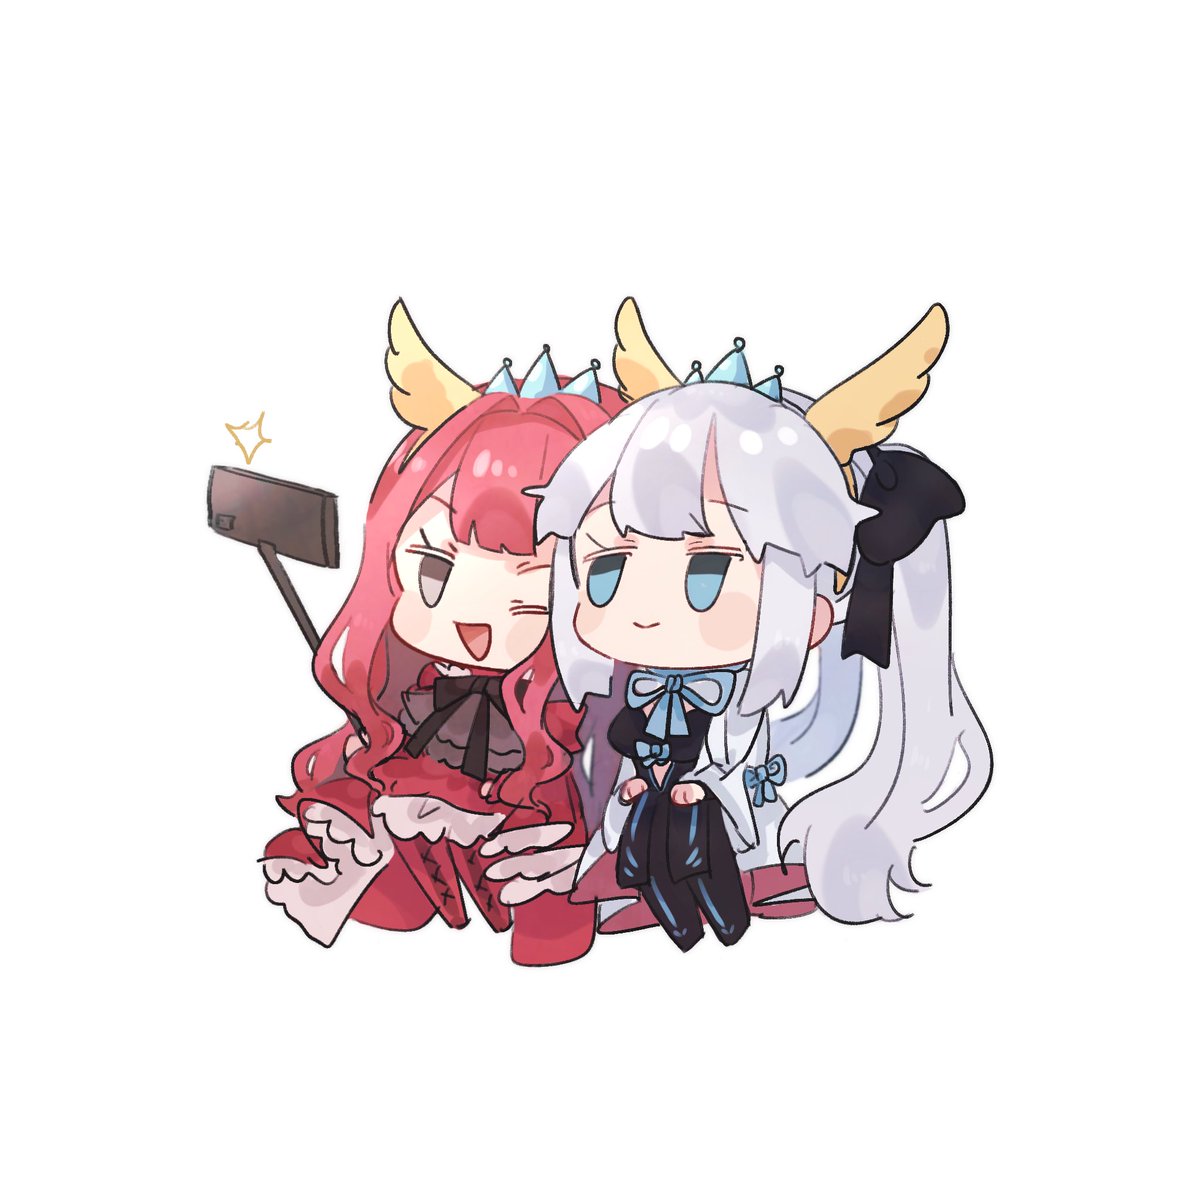 fairy knight tristan (fate) ,morgan le fay (fate) multiple girls 2girls one eye closed chibi selfie phone smile  illustration images